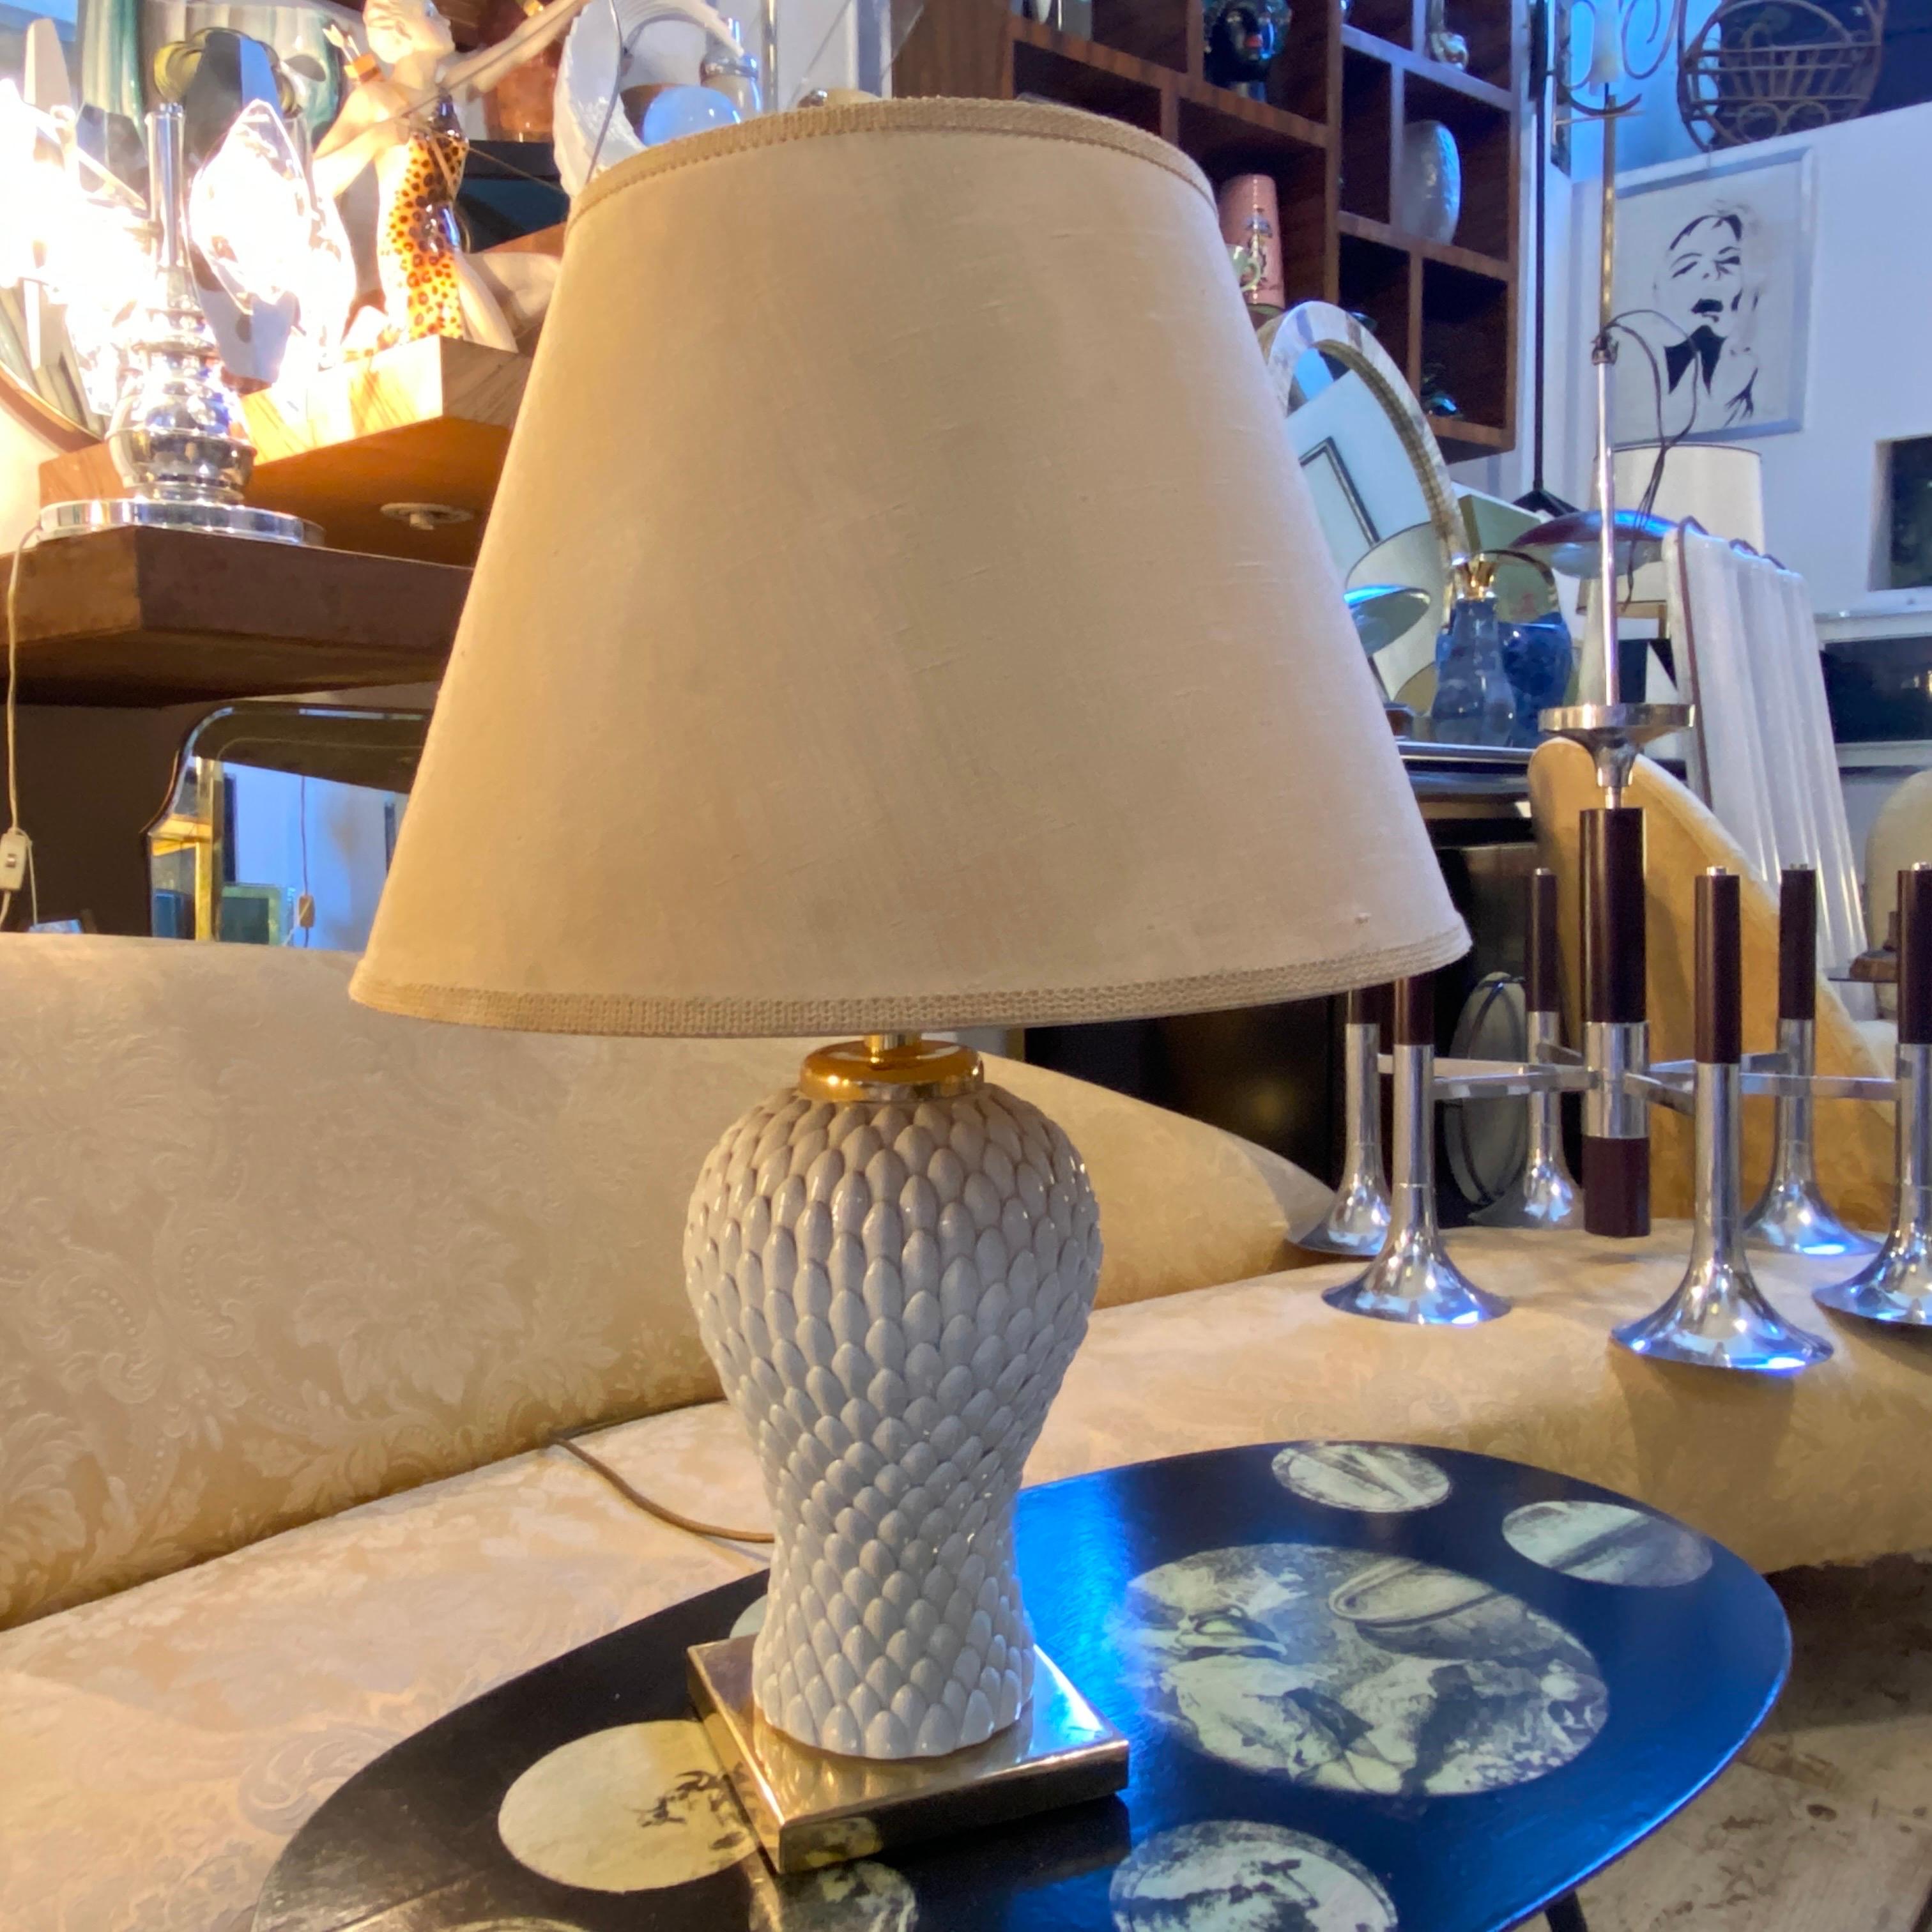 An high quality table lamp designed and manufactured in Italy in the Eighties, in perfect condition with original lampshade with normal signs of age. Base side dimensions is cm 18, it works both 110-240 volts and needs regular e27 bulb.
The 1980s